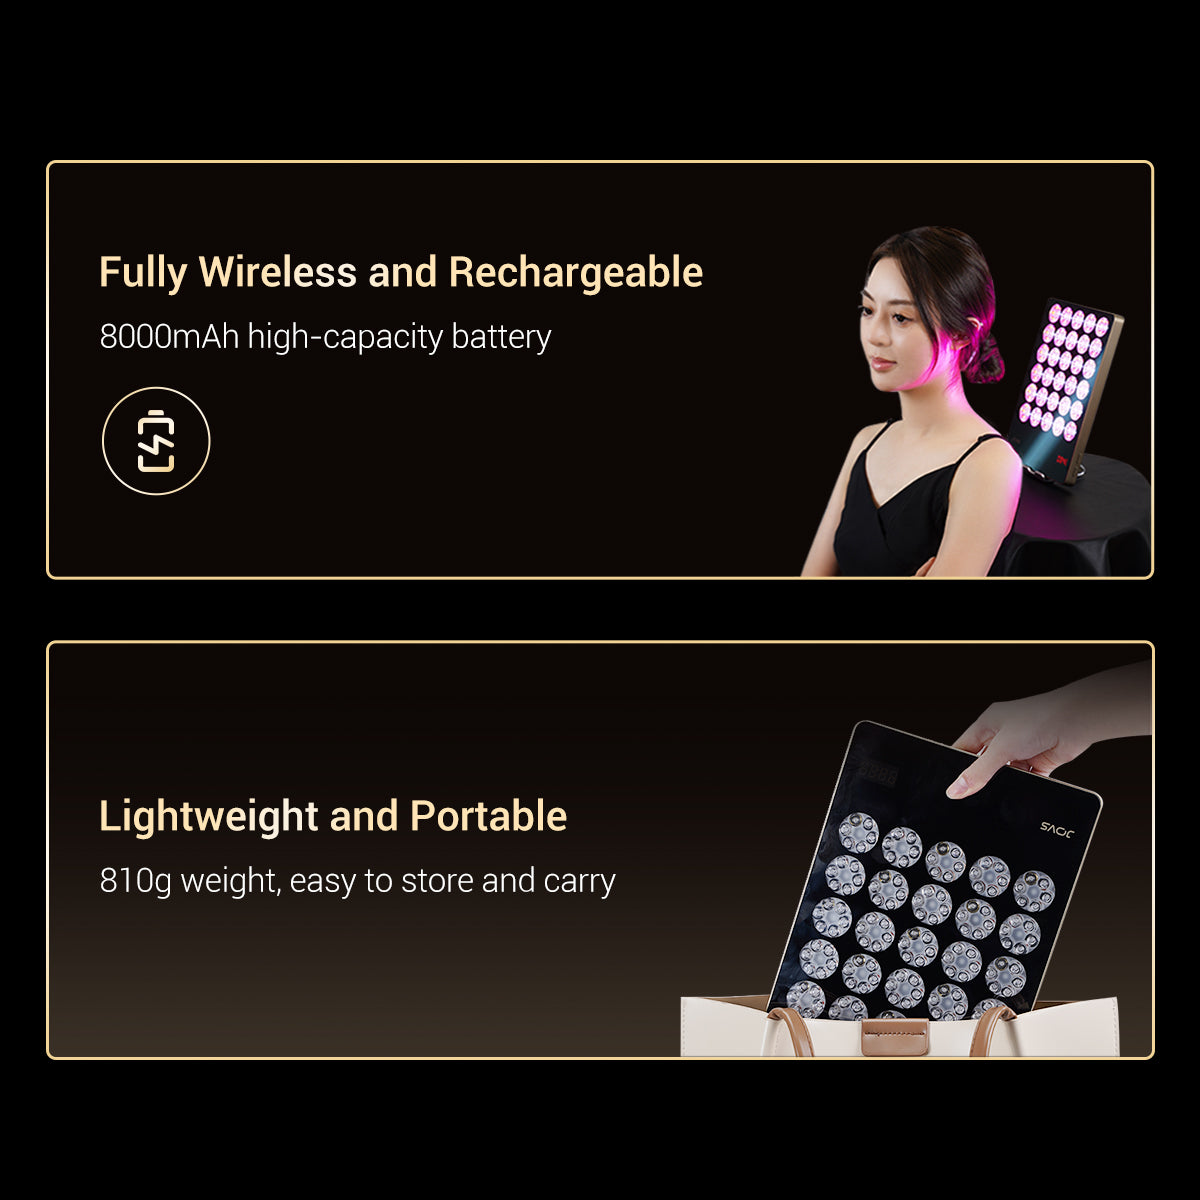 Compact and rechargeable JOVS LED light therapy panel, wireless with high-capacity battery for skincare on the go.